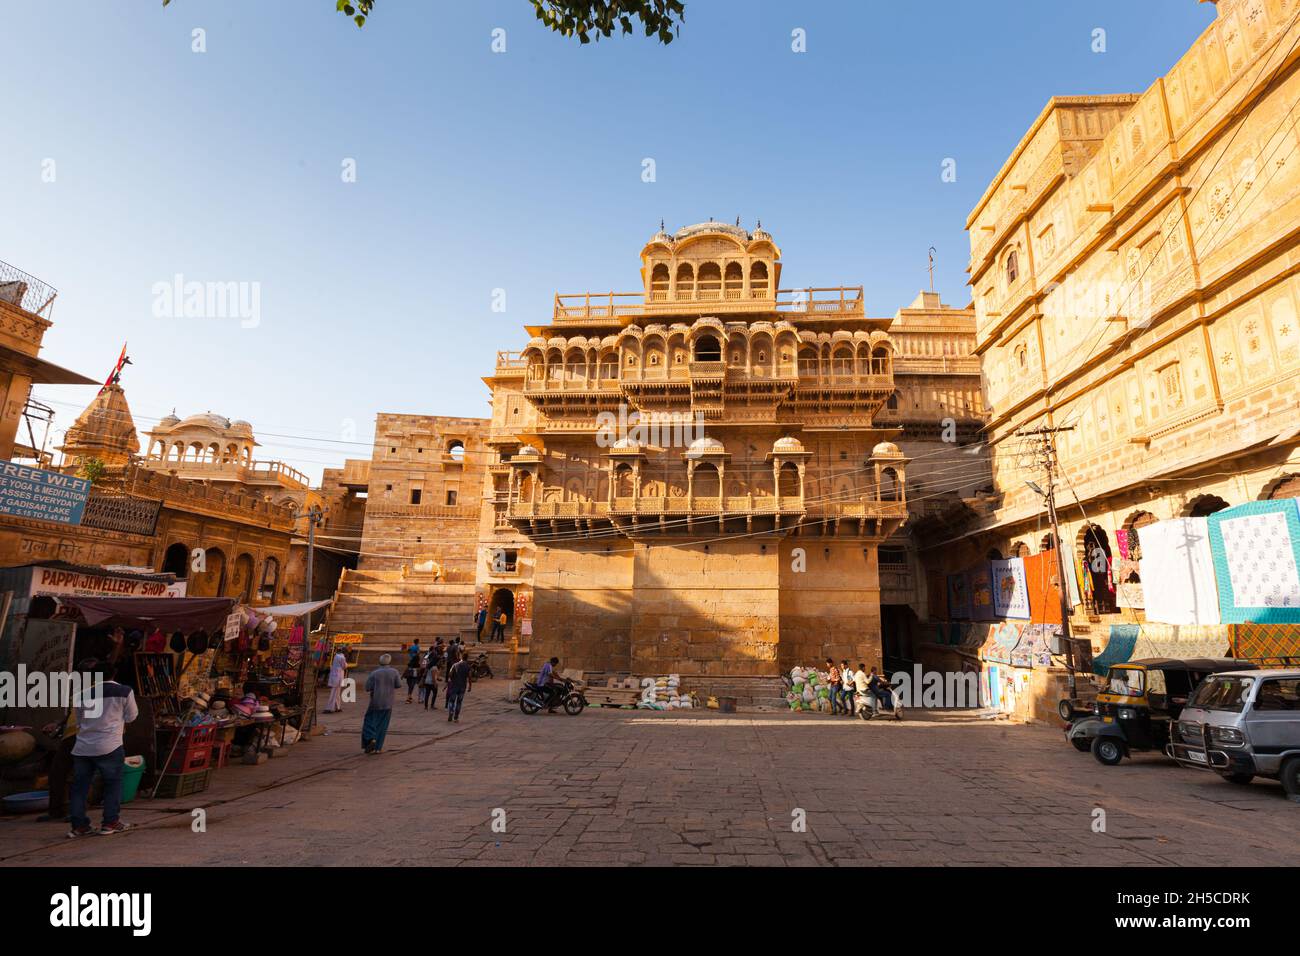 Fort of Jaisalmer in Rajasthan, India Stock Photo